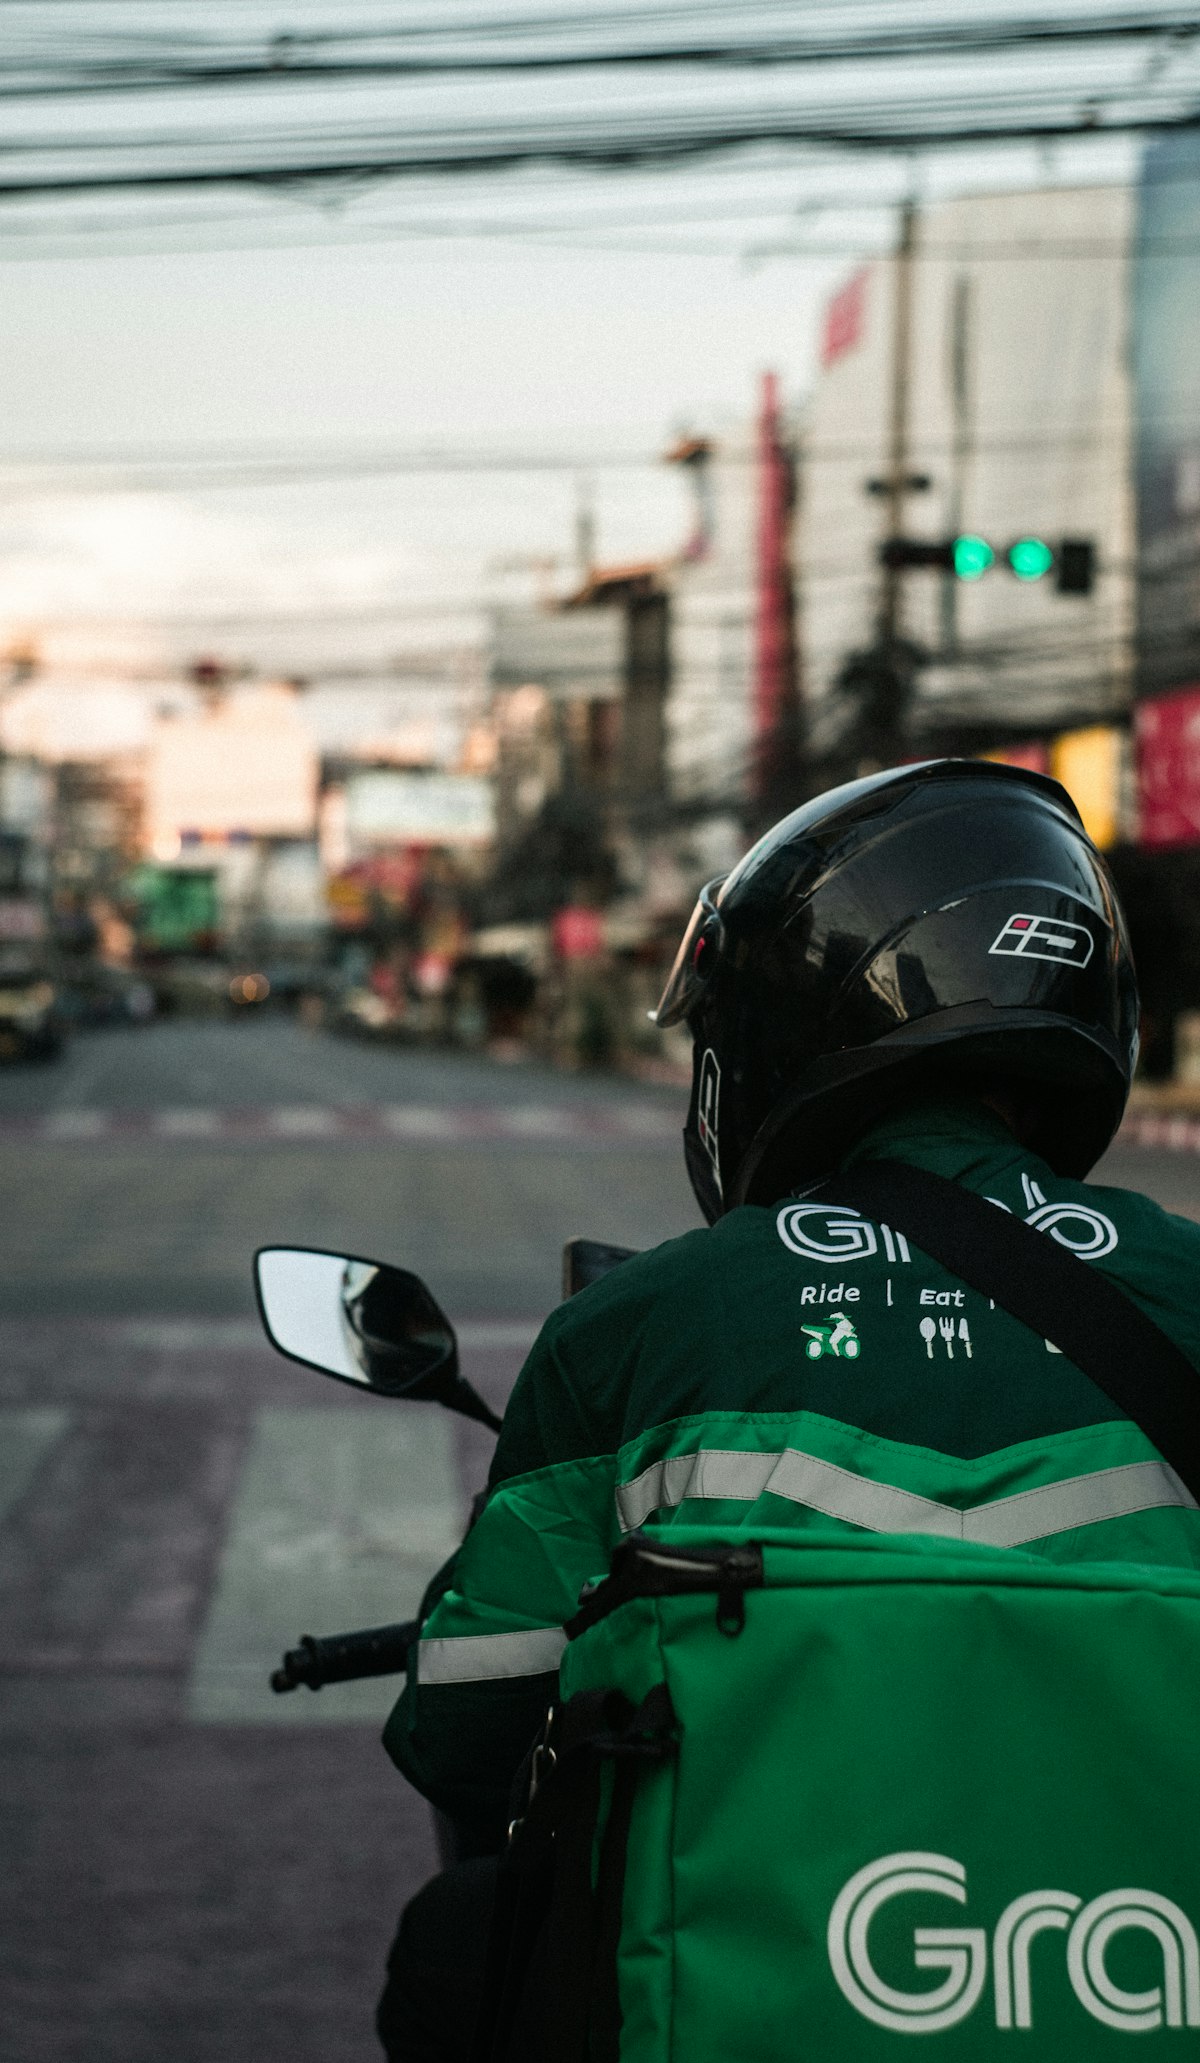 Grab Unveils 2022 Delivery Trends Plus Its New Features